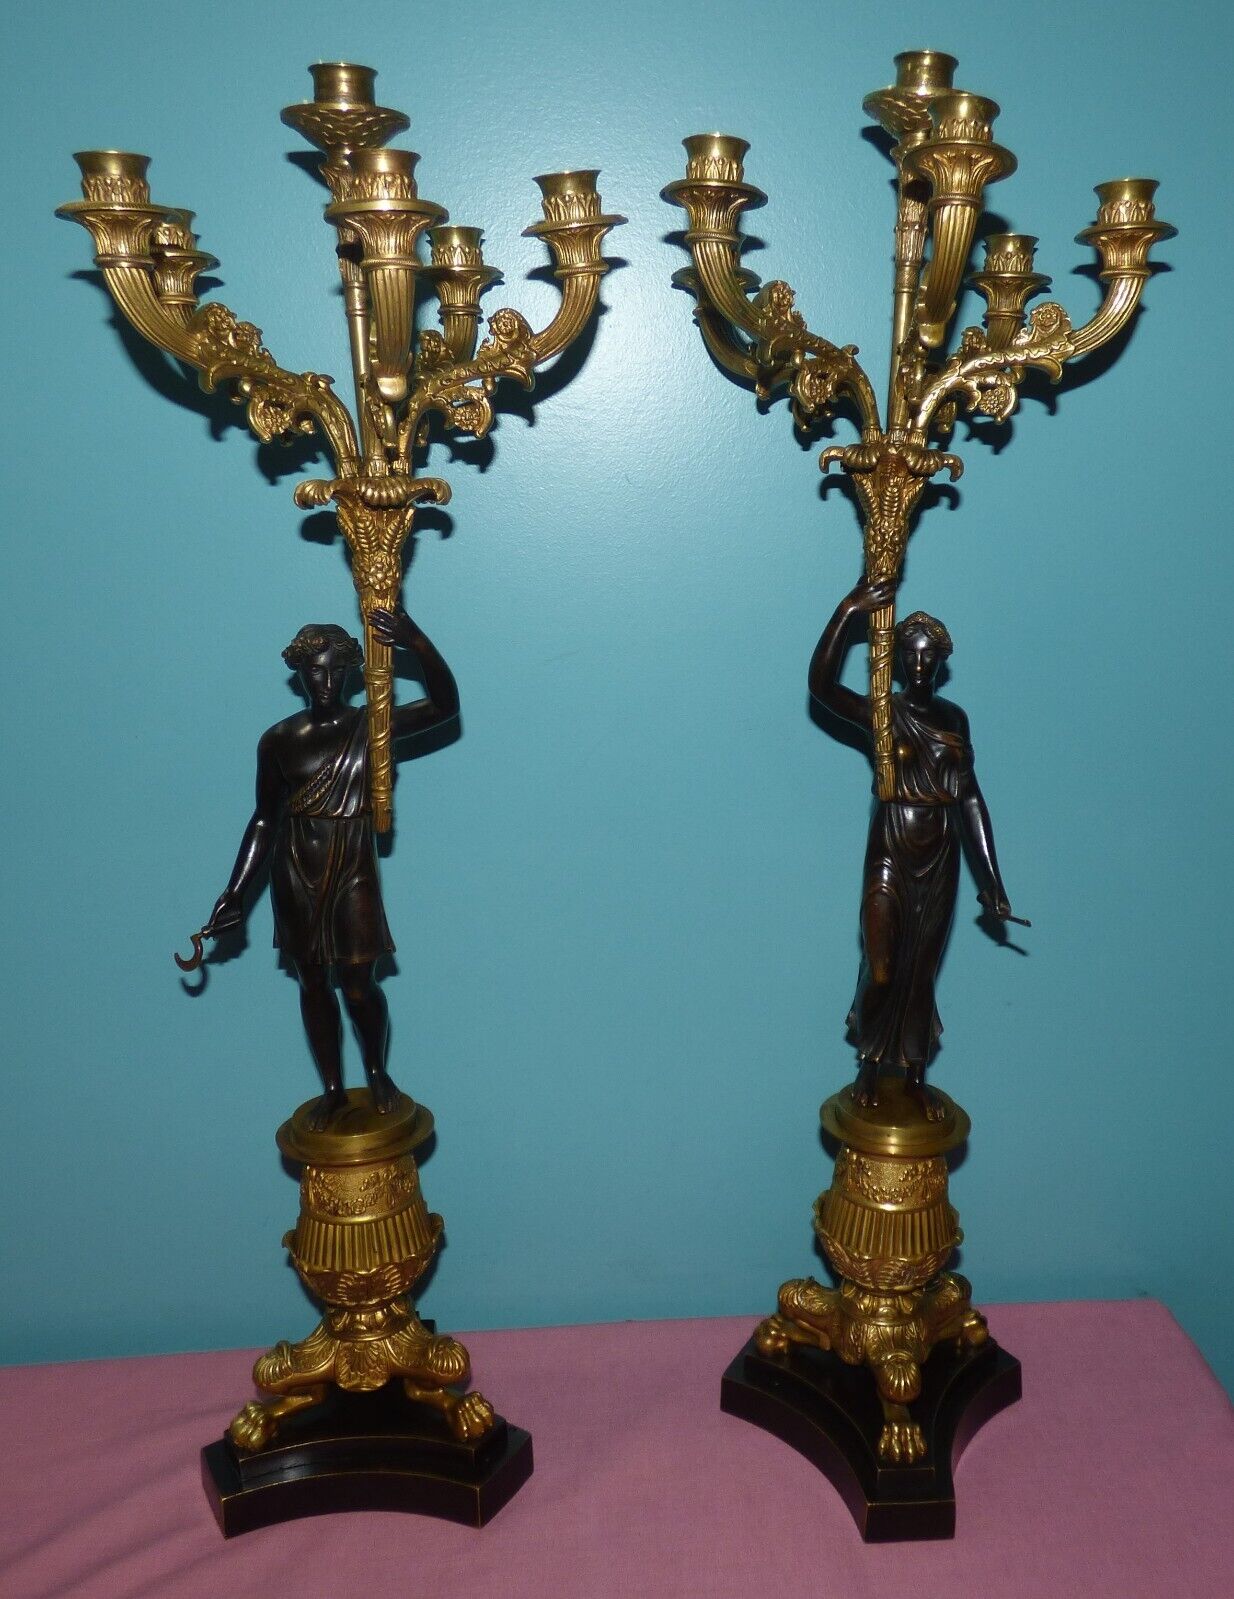 Pair of French Empire Gilt & Painted Bronze 6 Arm Candelabras Figural Bacchantes